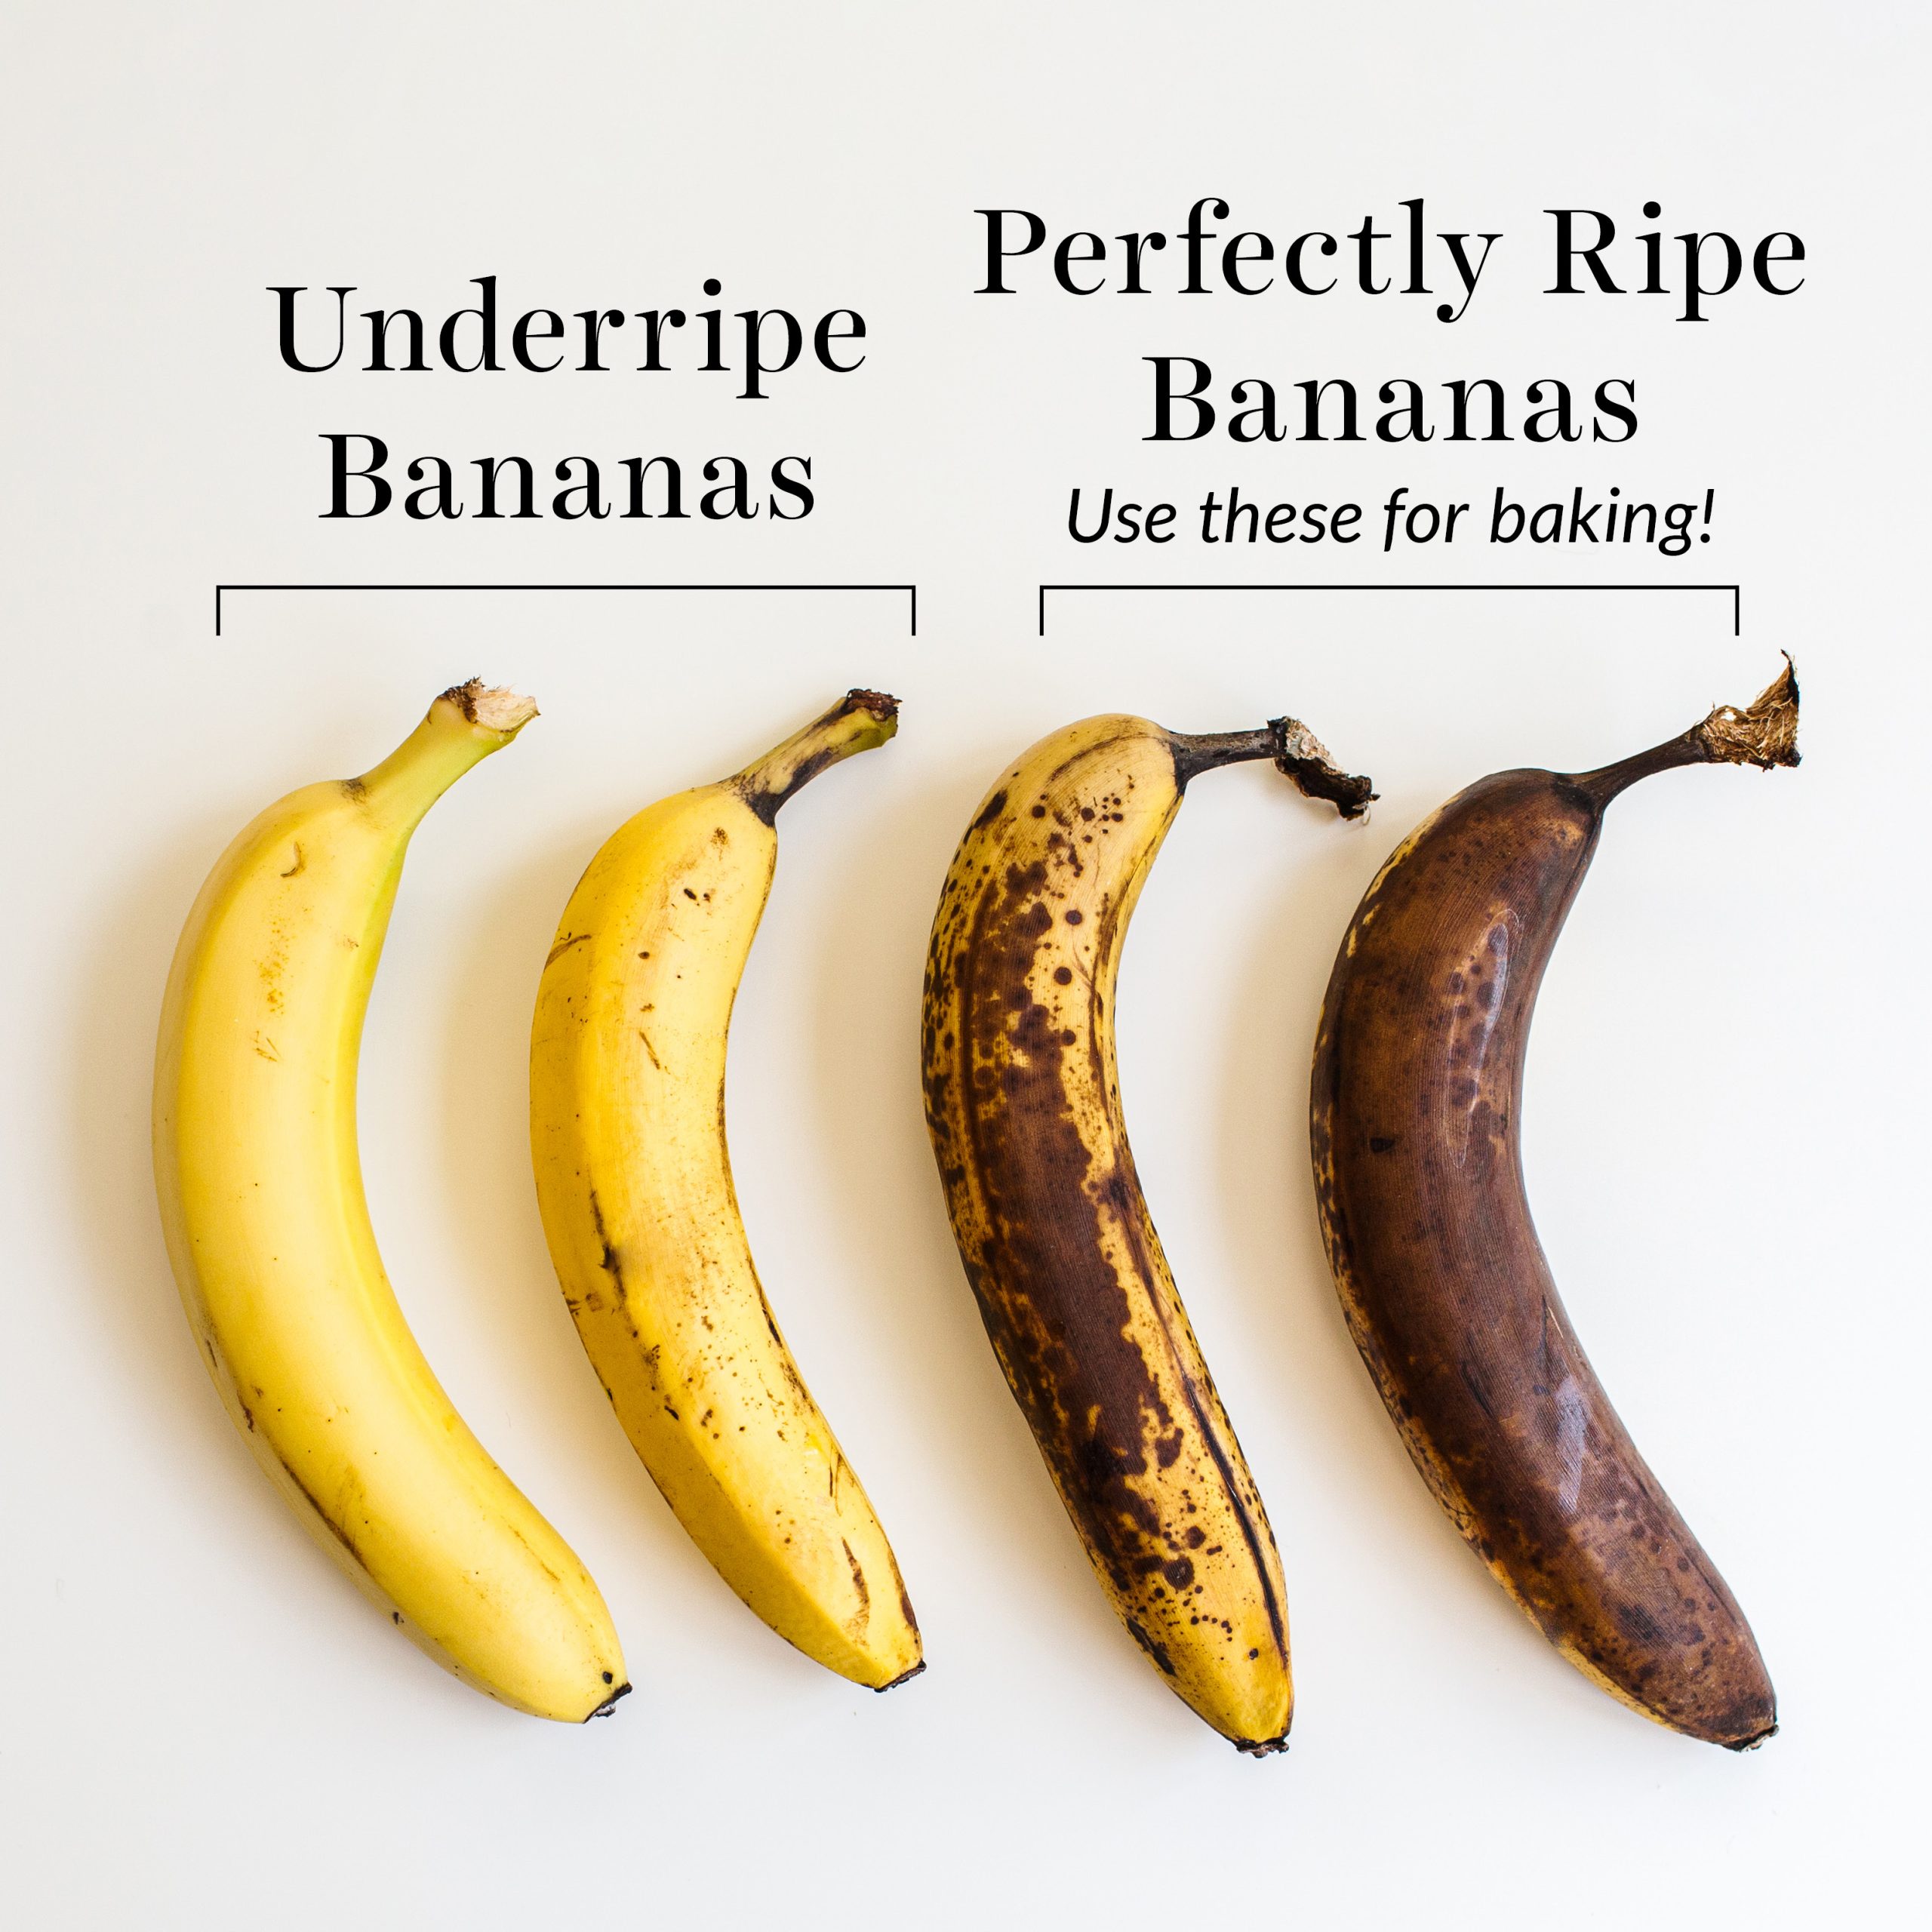 side-by-side comparisons of bananas to show which is best for baking